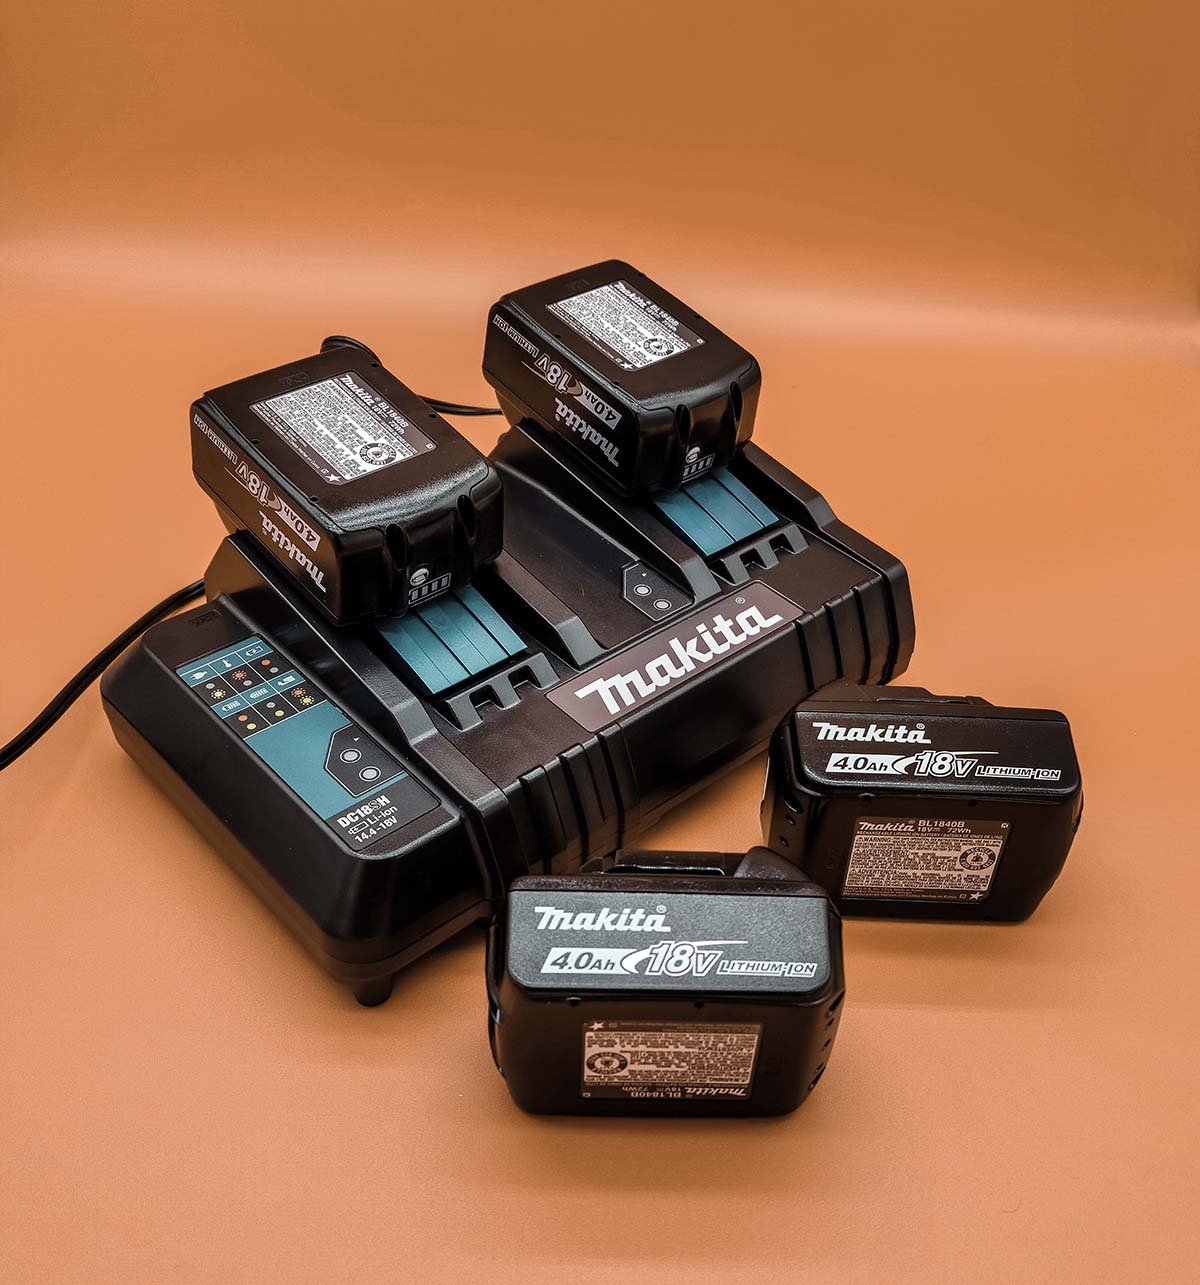 Four lithium-ion batteries and charger for Makita lawn mower